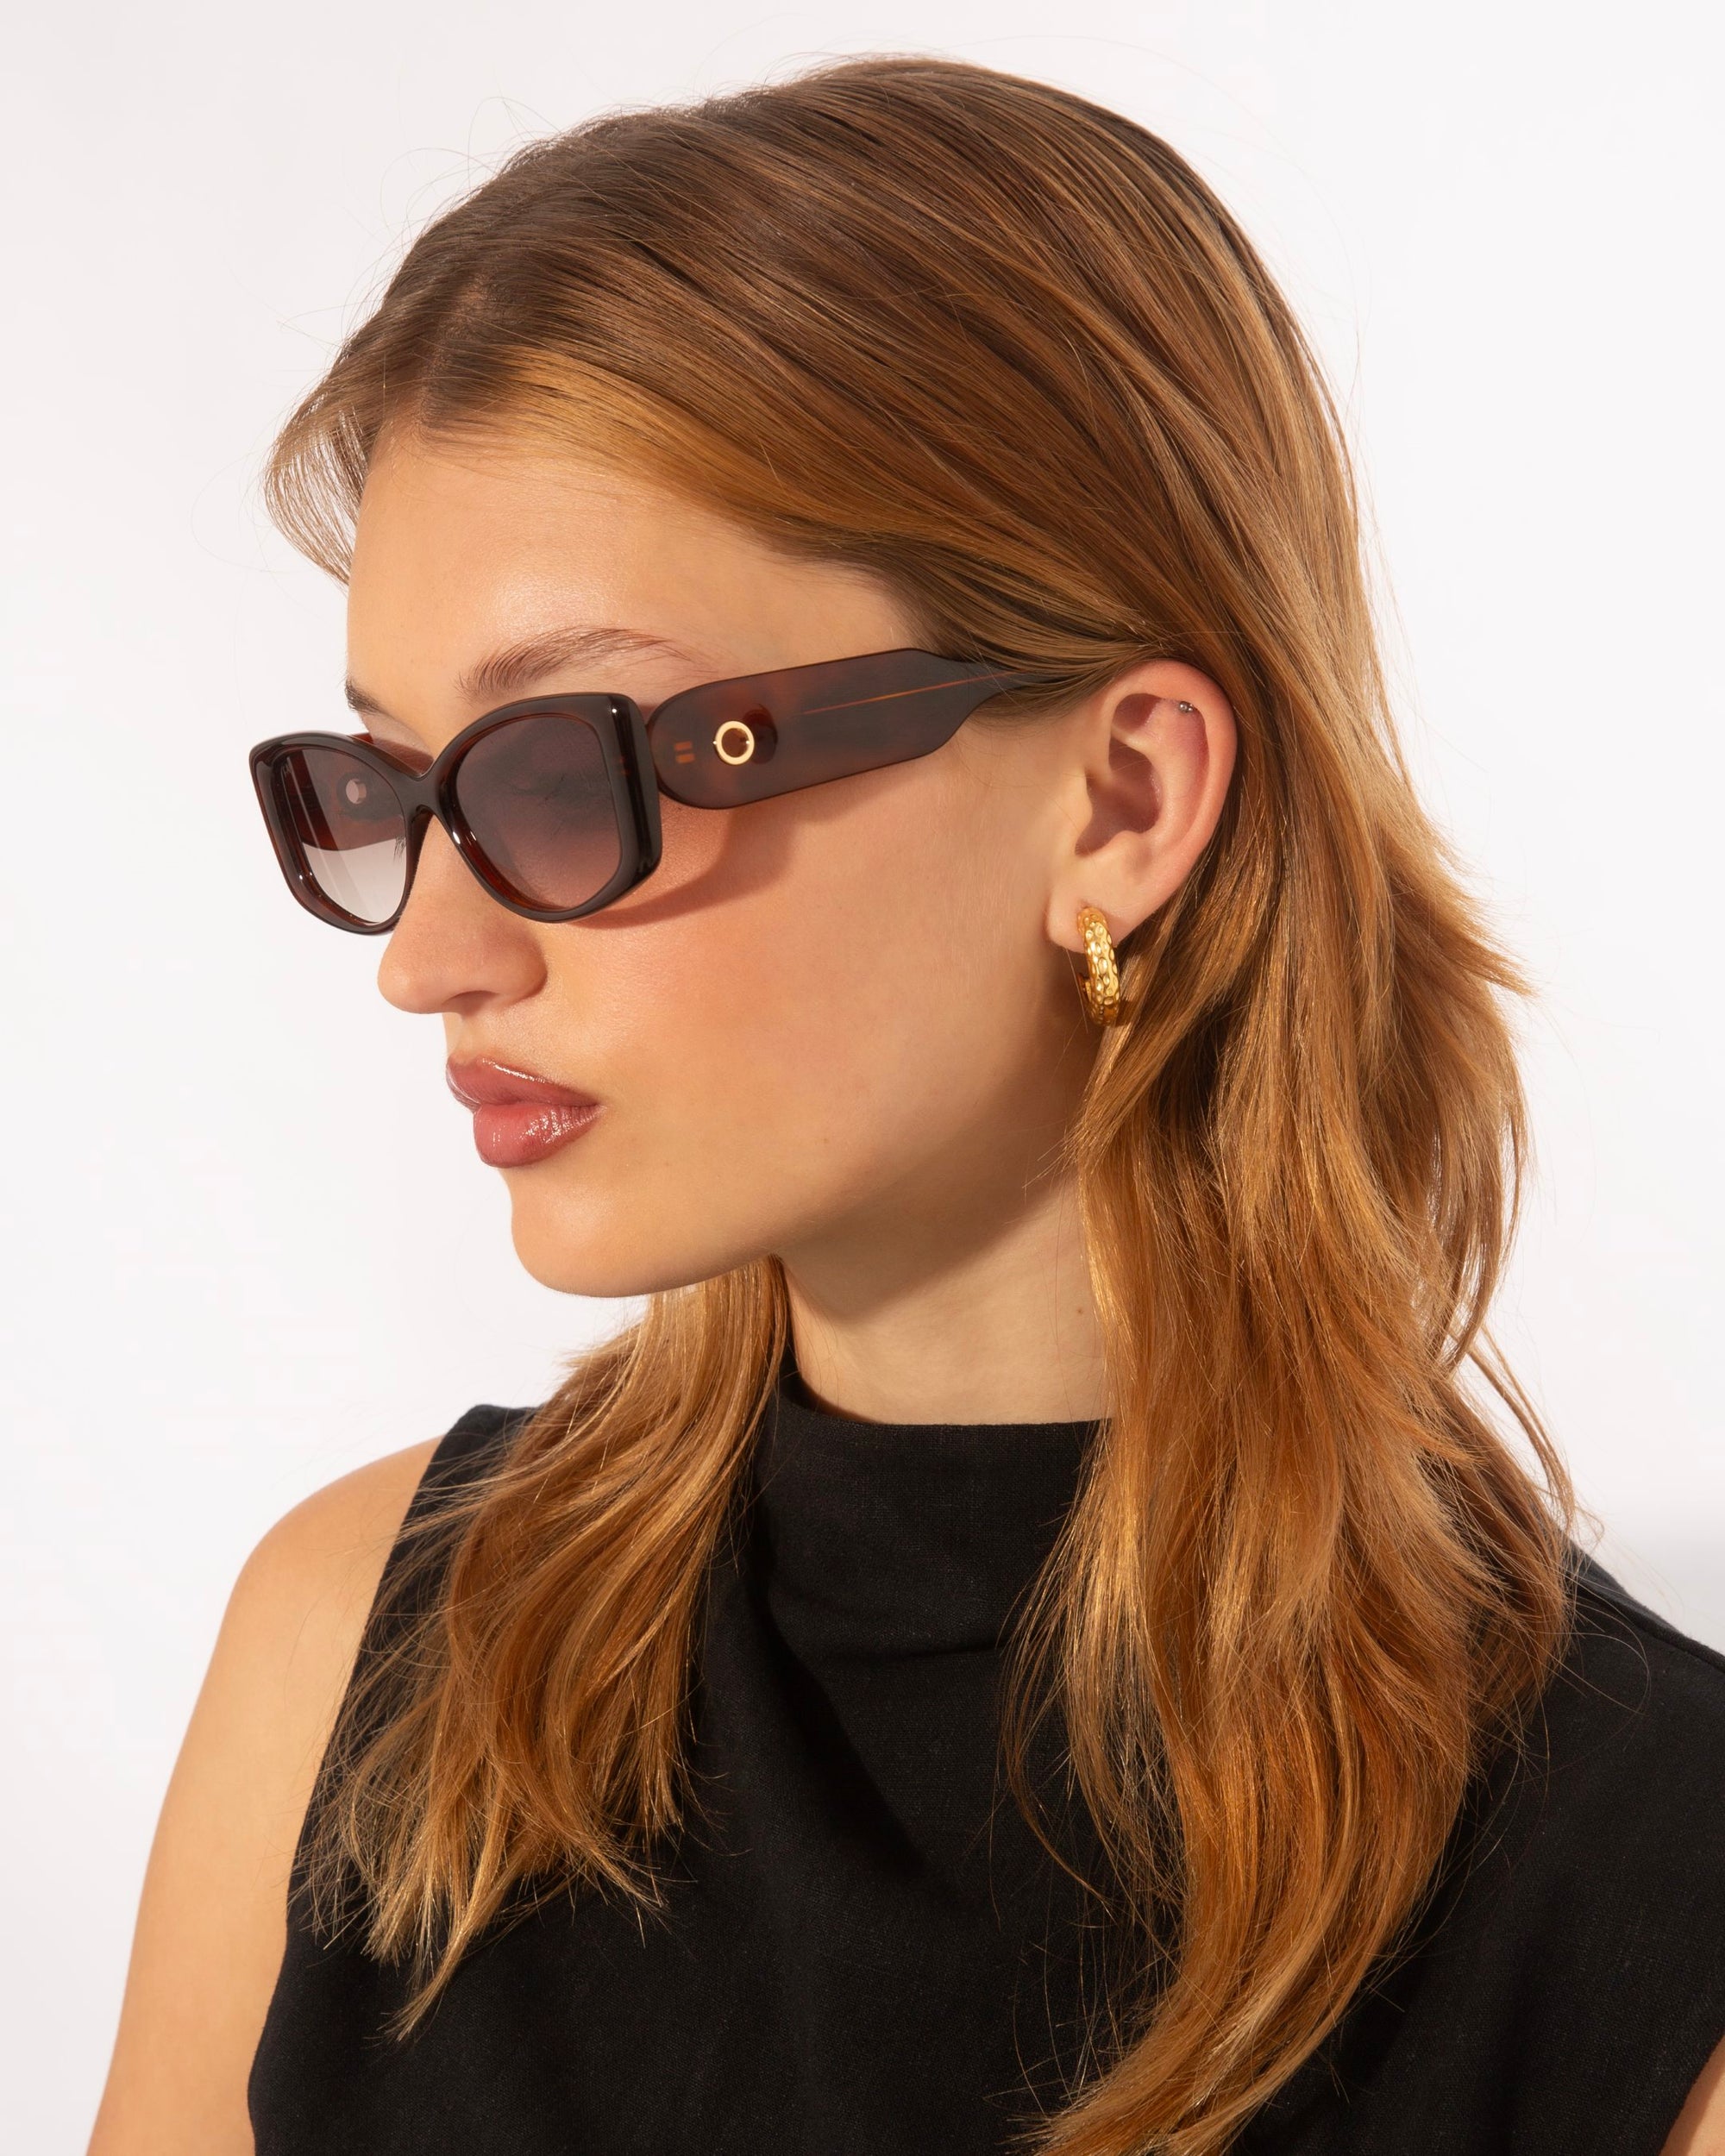 A person with long, reddish-brown hair, wearing 18 karat gold For Art&#39;s Sake® Mene sunglasses and gold hoop earrings, looks to the side. They are dressed in a sleeveless black top against a plain white background.